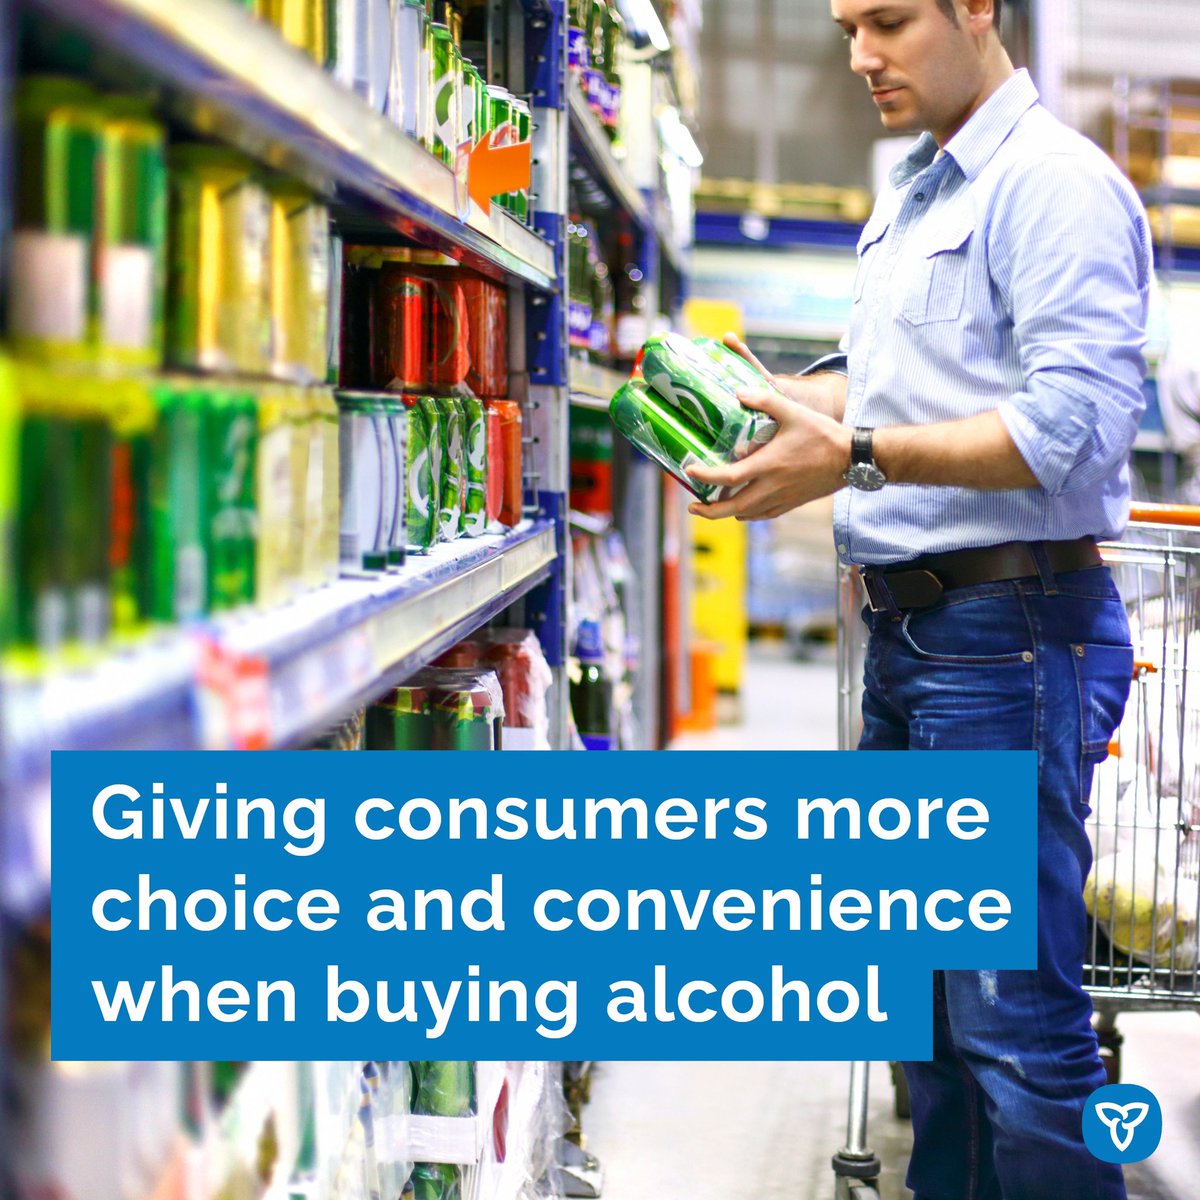 NEW: Premier @fordnation and Minister @PBethlenfalvy have announced that we are delivering on our commitment to provide more choice and convenience for consumers when buying beverage alcohol.   Starting later this summer and into the fall, customers in #Ontario can purchase beer,